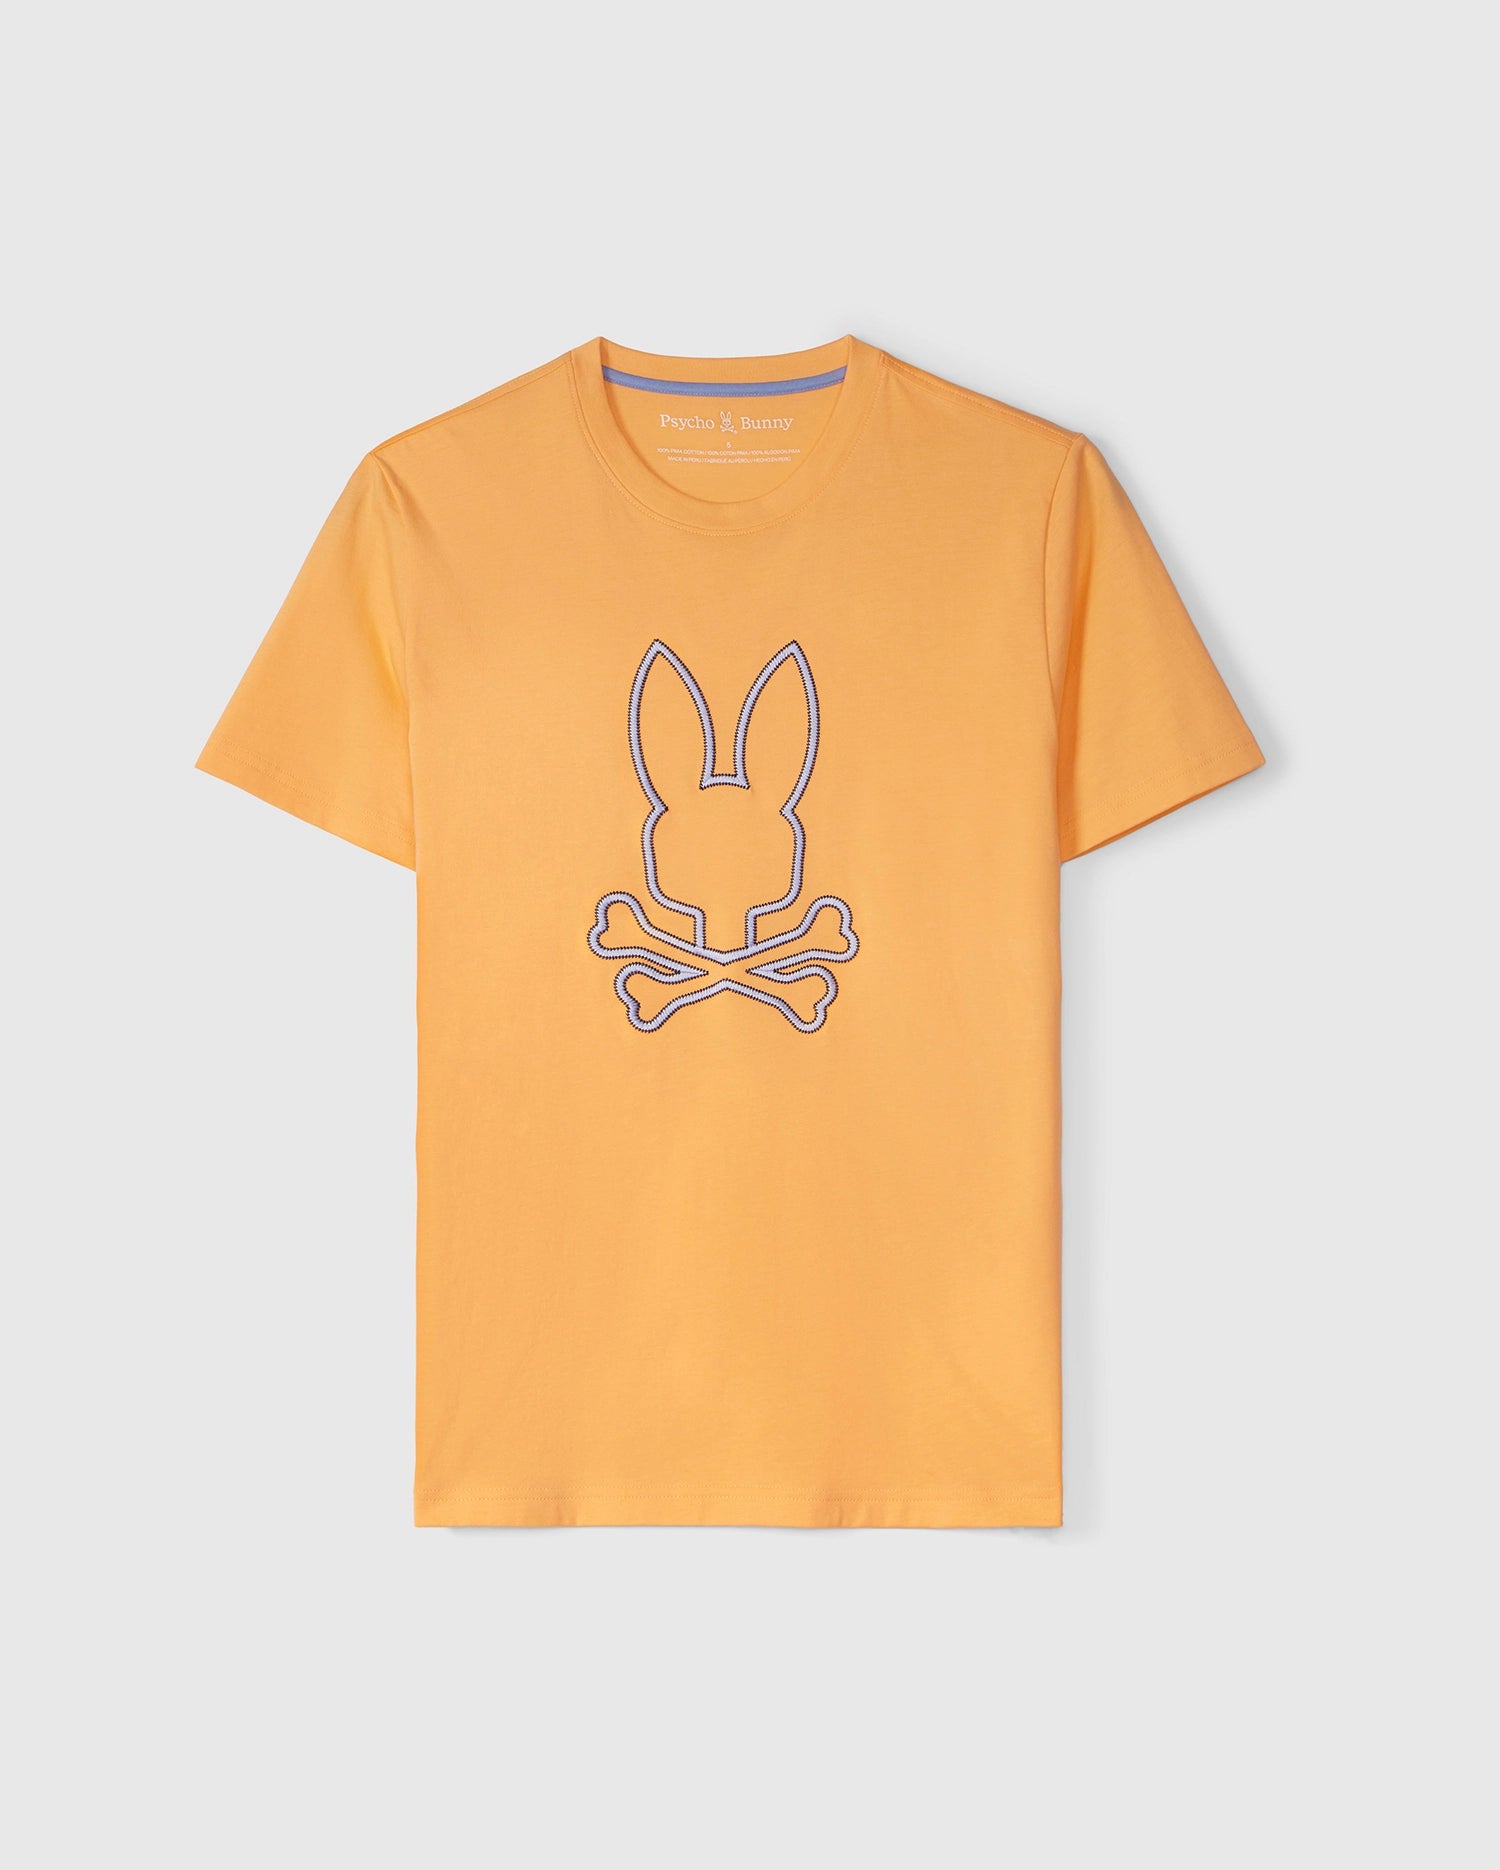 An orange Psycho Bunny MENS FLOYD GRAPHIC TEE - B6U338B2TS featuring a graphic design of a bunny head with elongated ears above crossed bones. The embroidered Bunny outline is highlighted in blue. The regular fit T-shirt is displayed against a plain white background.